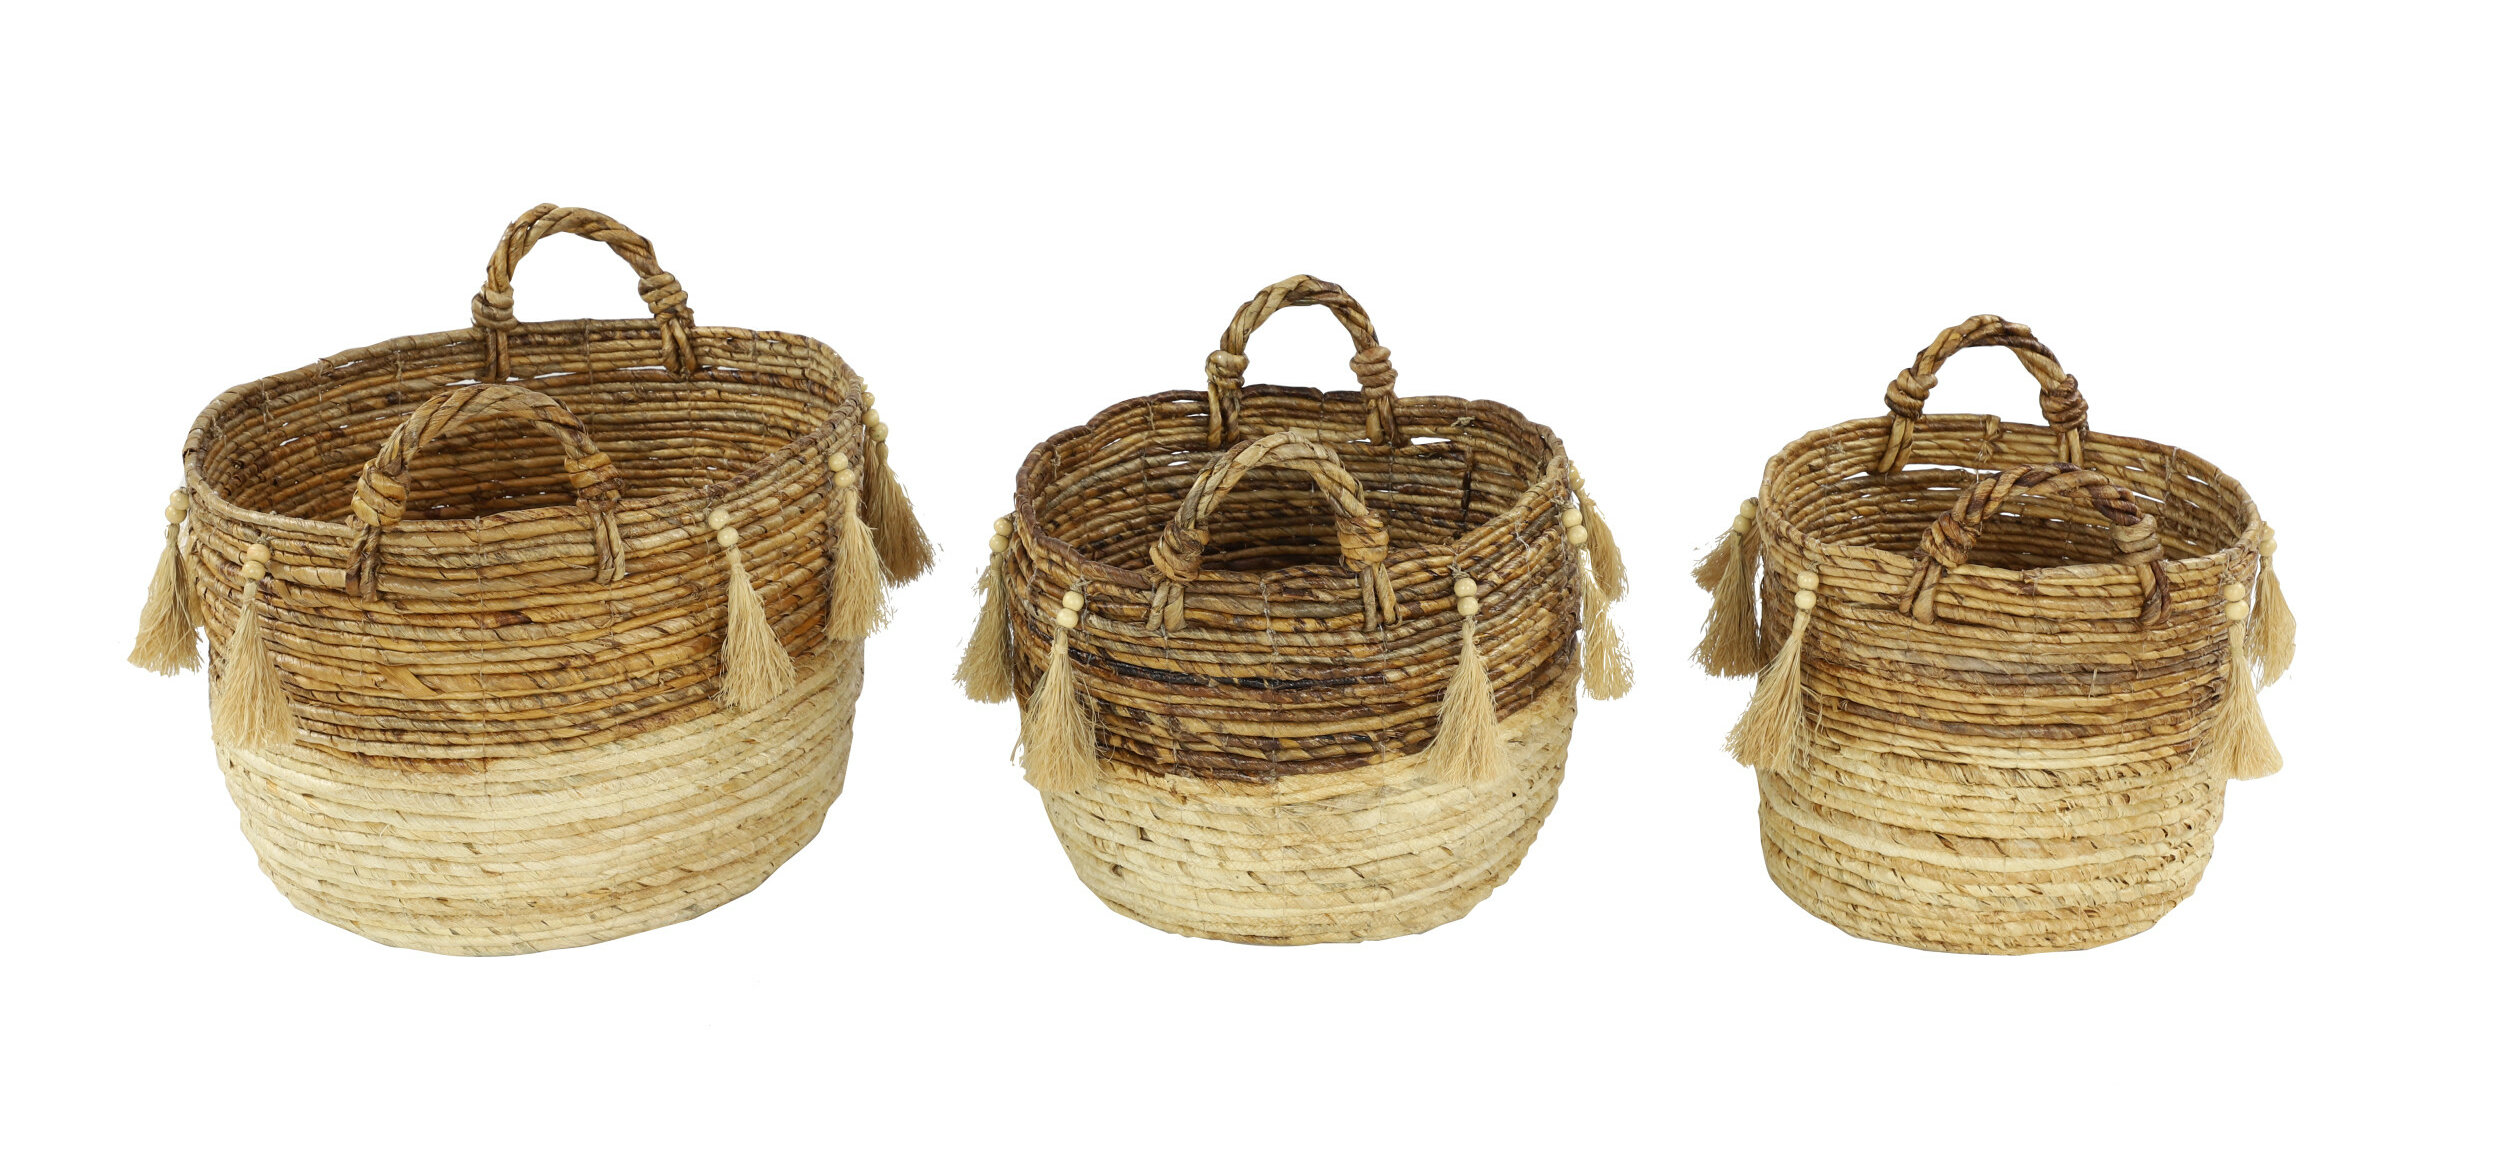 Stylish Country Style Hand-Woven Wicker Basket Shopping Basket Storage Basket with Handle for Picnic Hiking Camping Family Gathering Lightweight and Durable Double Lid Design